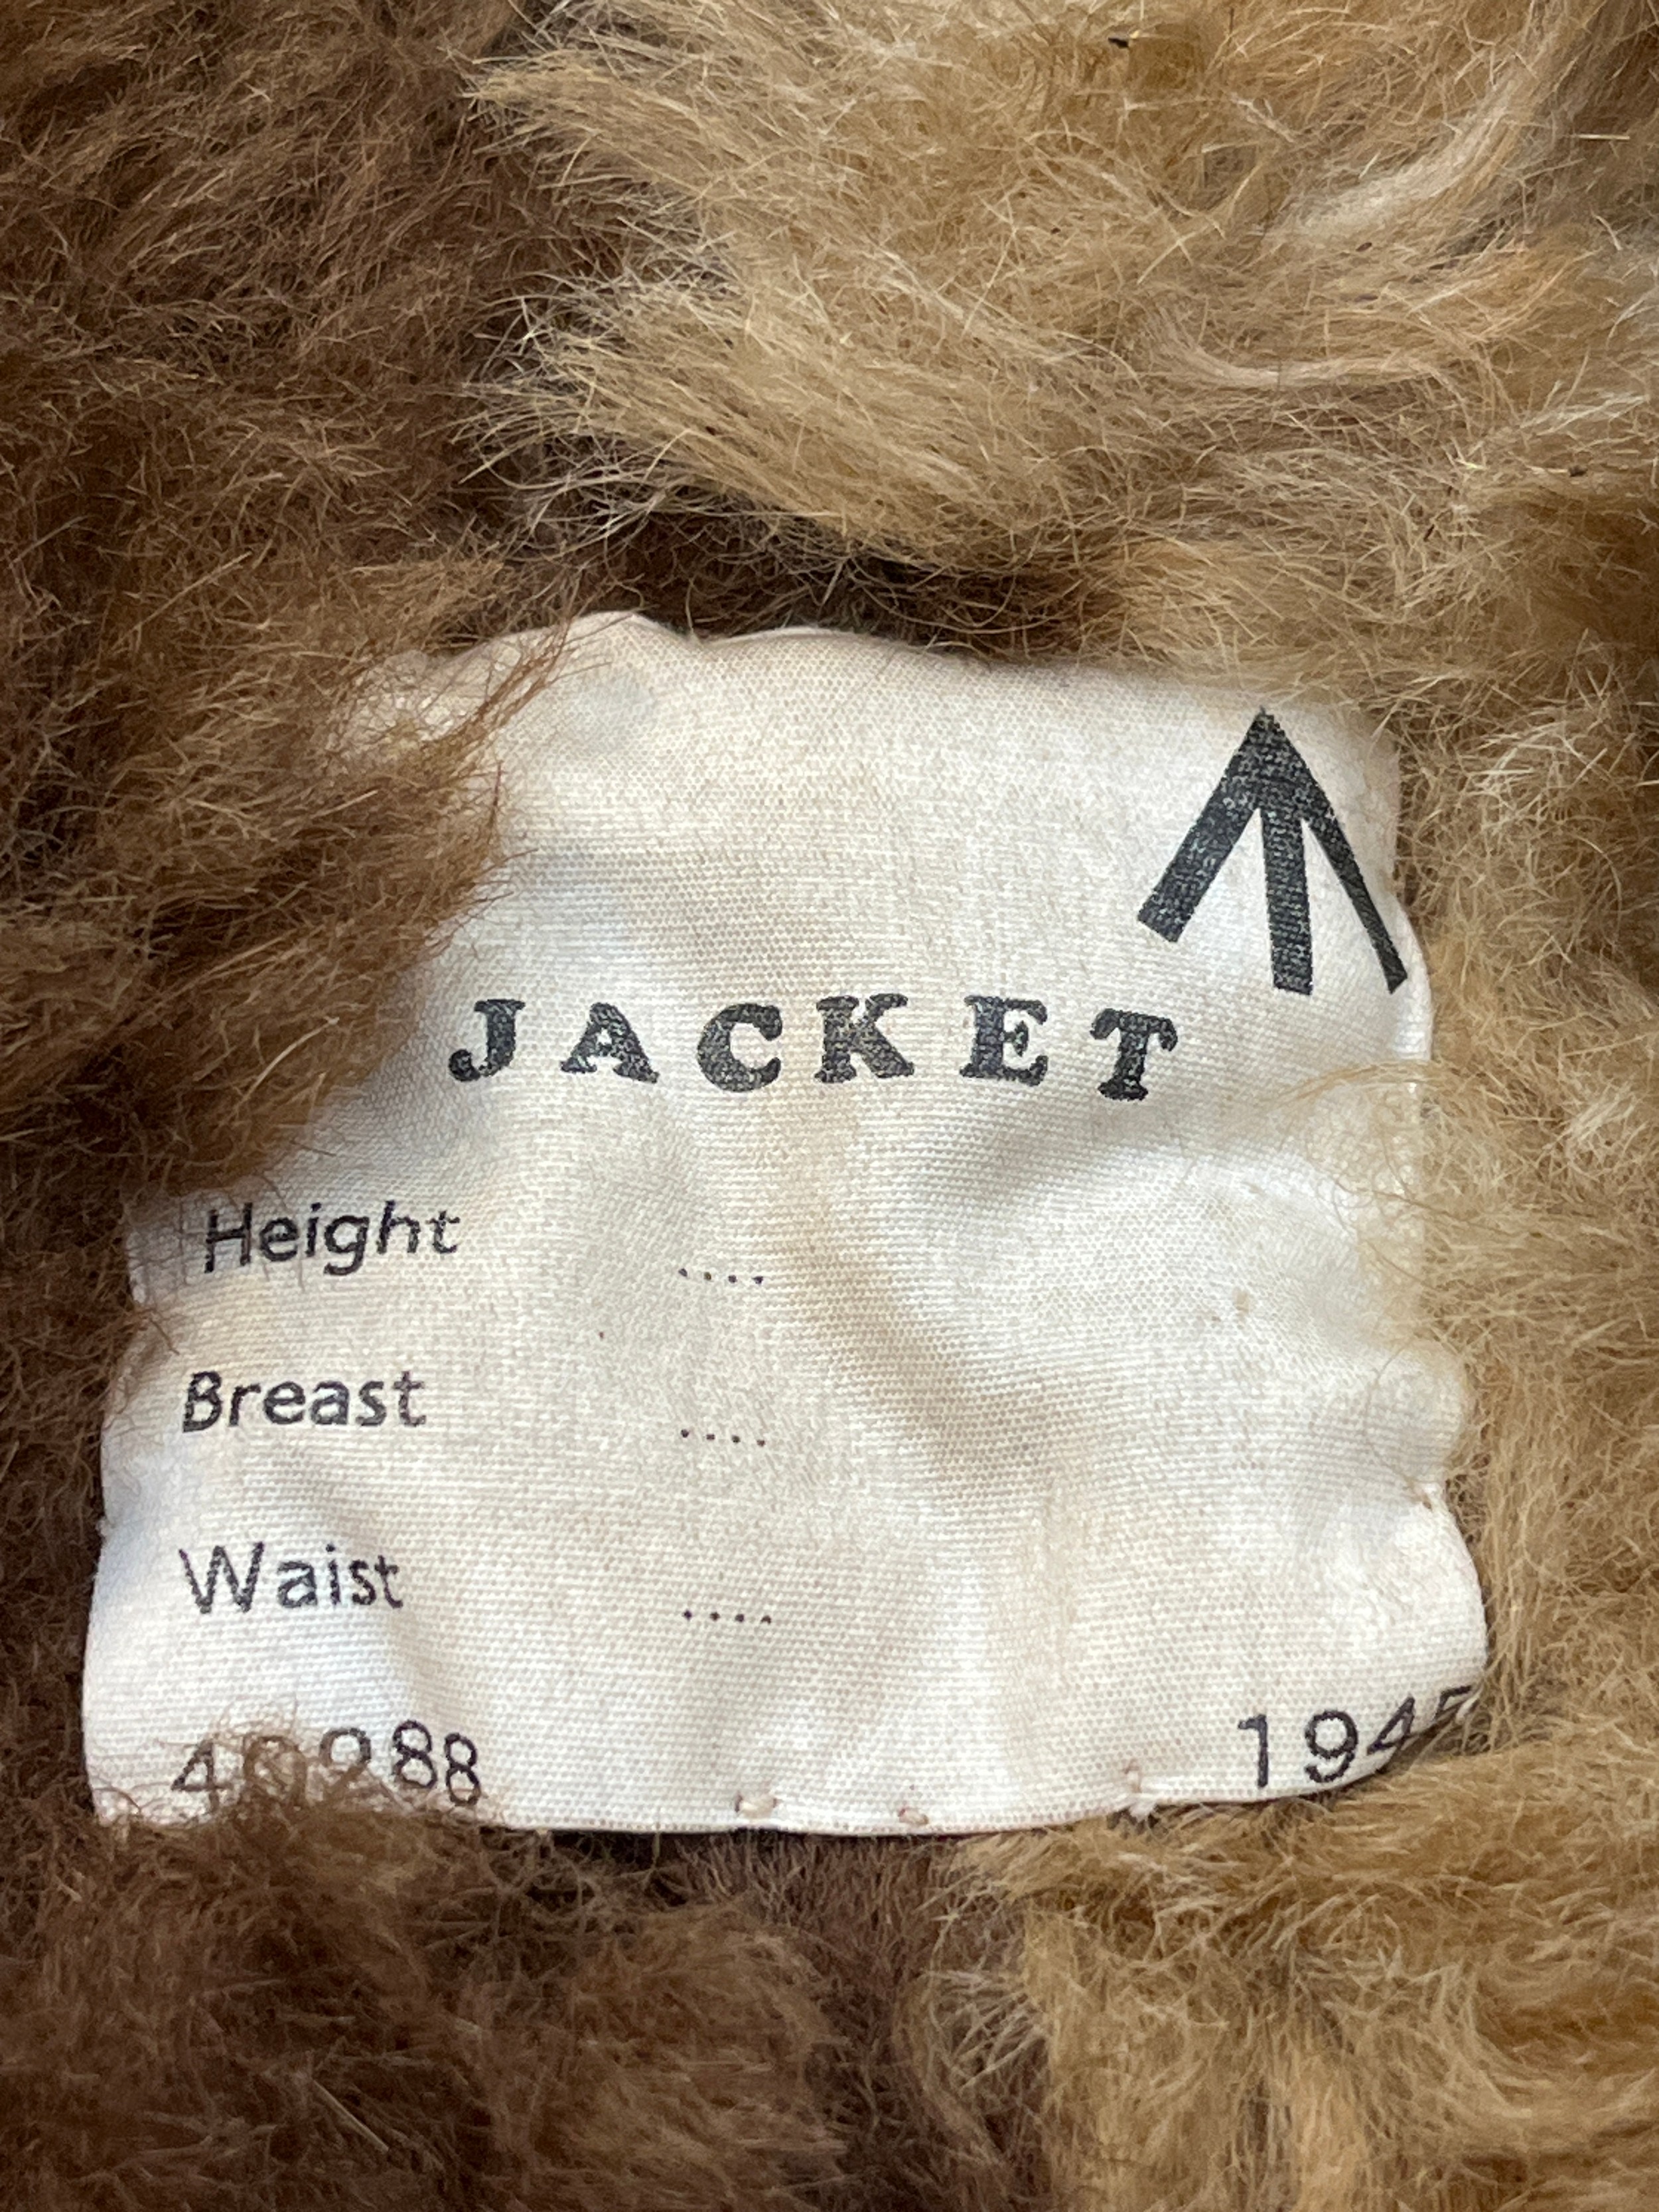 A WWII British RAF Irvin flying jacket circa 1945, from the estate of the late CMDR. R.C.R. - Image 6 of 6